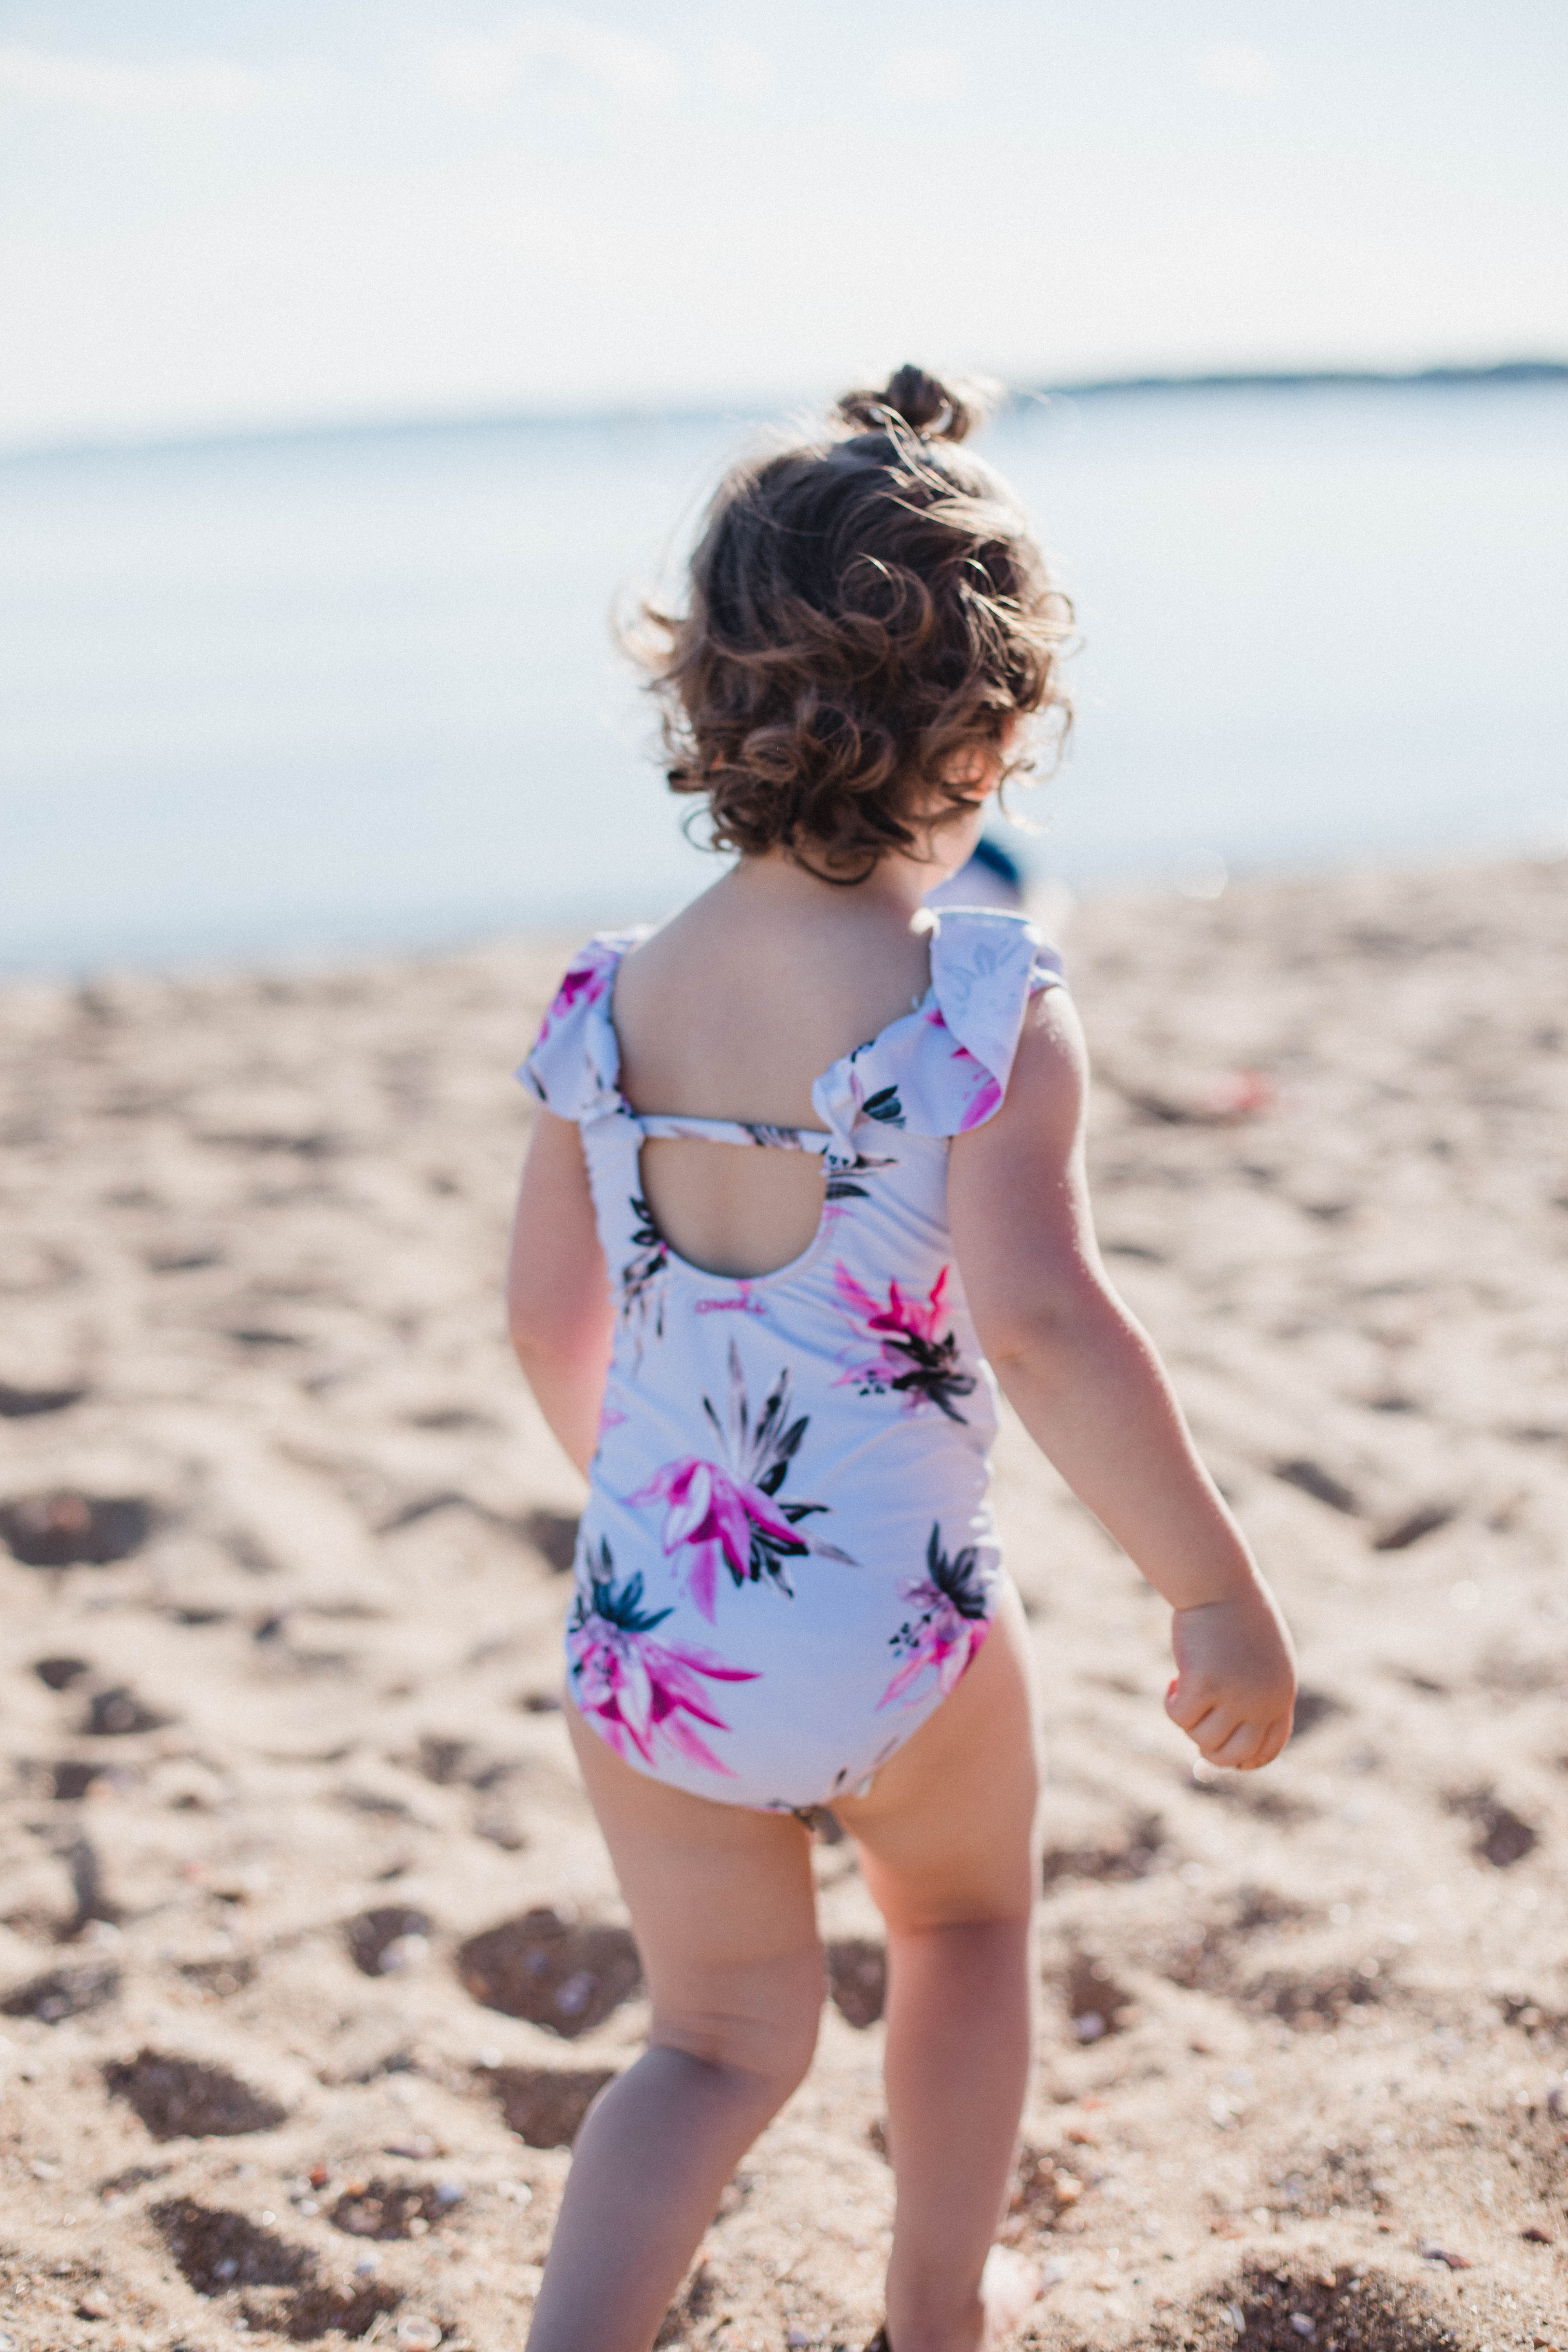 Life and style blogger Lauren McBride shares her Beach Essentials for Kids that will get your family through beach season this summer, featuring swimwear, toys, and more.